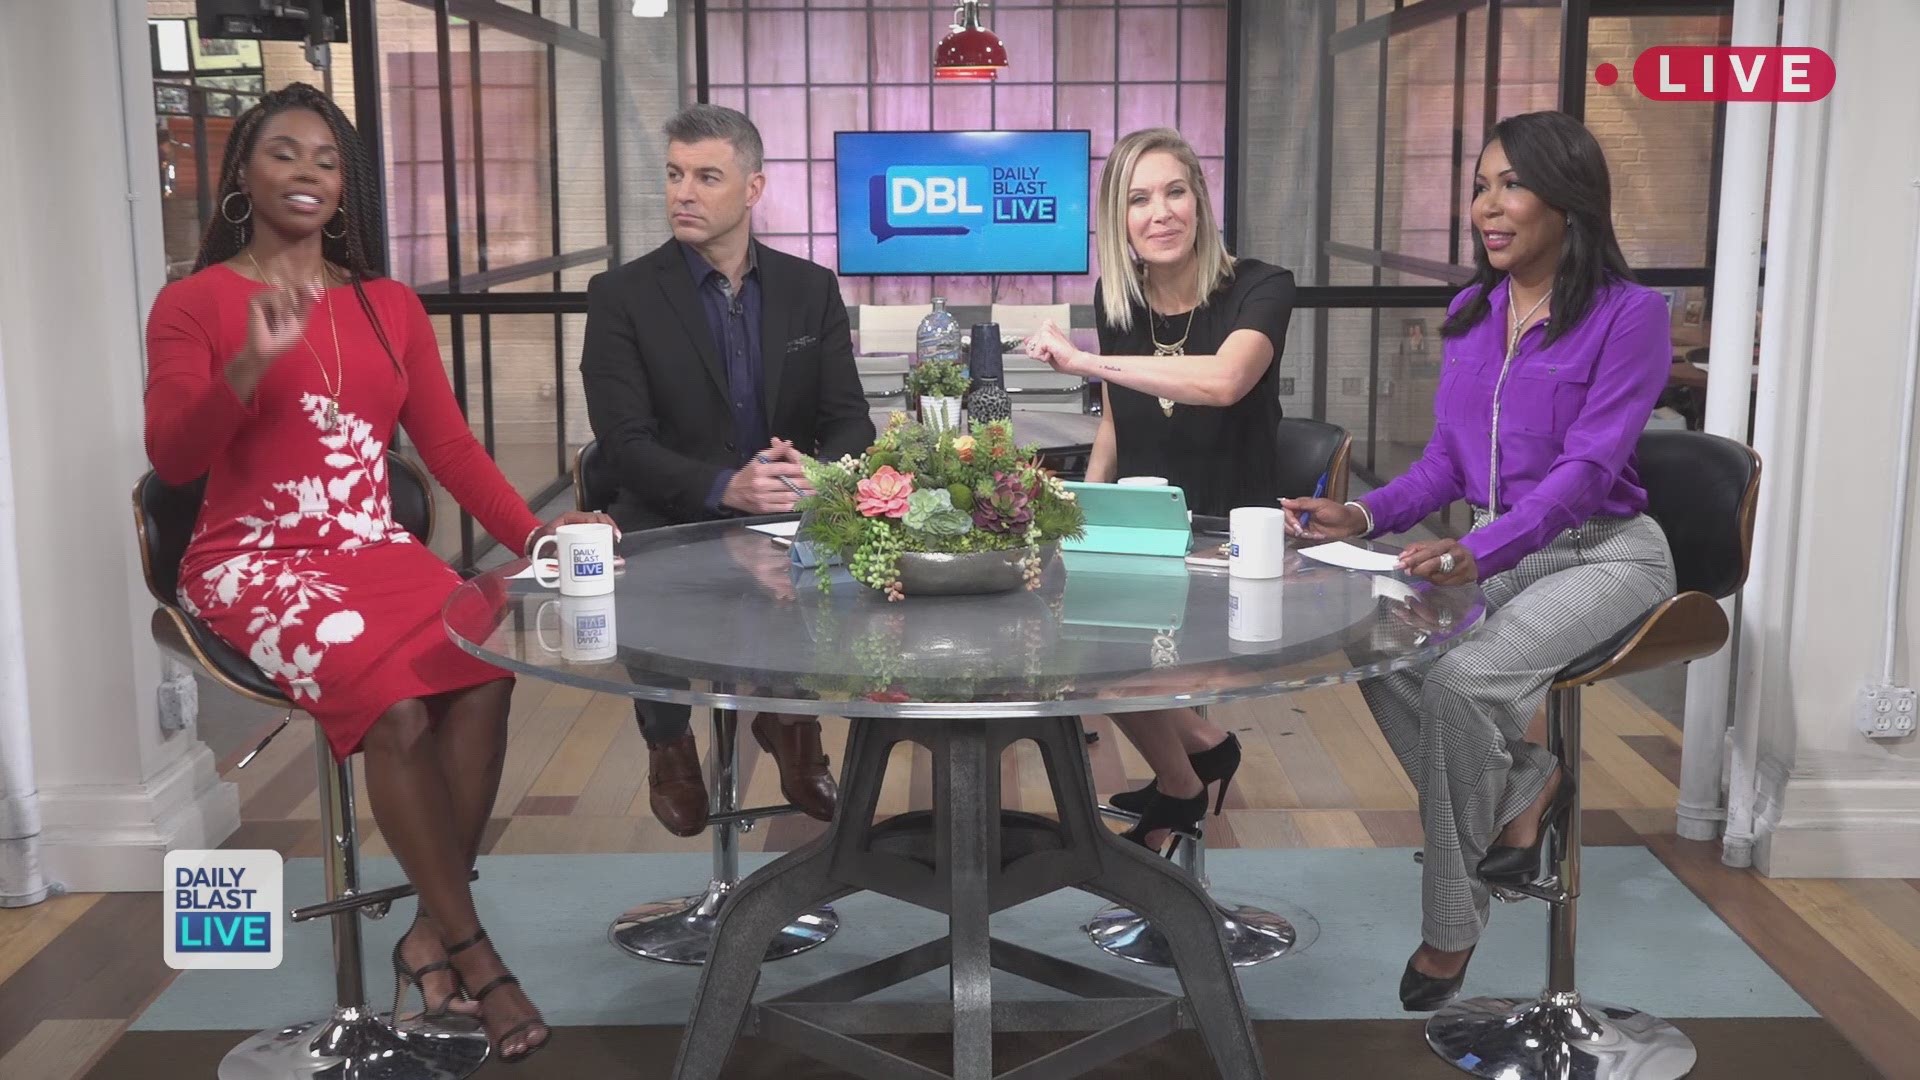 We are officially one day away from the royal wedding and Daily Blast LIVE is bringing all the breaking news on the nuptials. From the royal father walking Meghan Markle down the aisle to the last-minute mayhem ahead of the big day, co-host Tory Shulman i